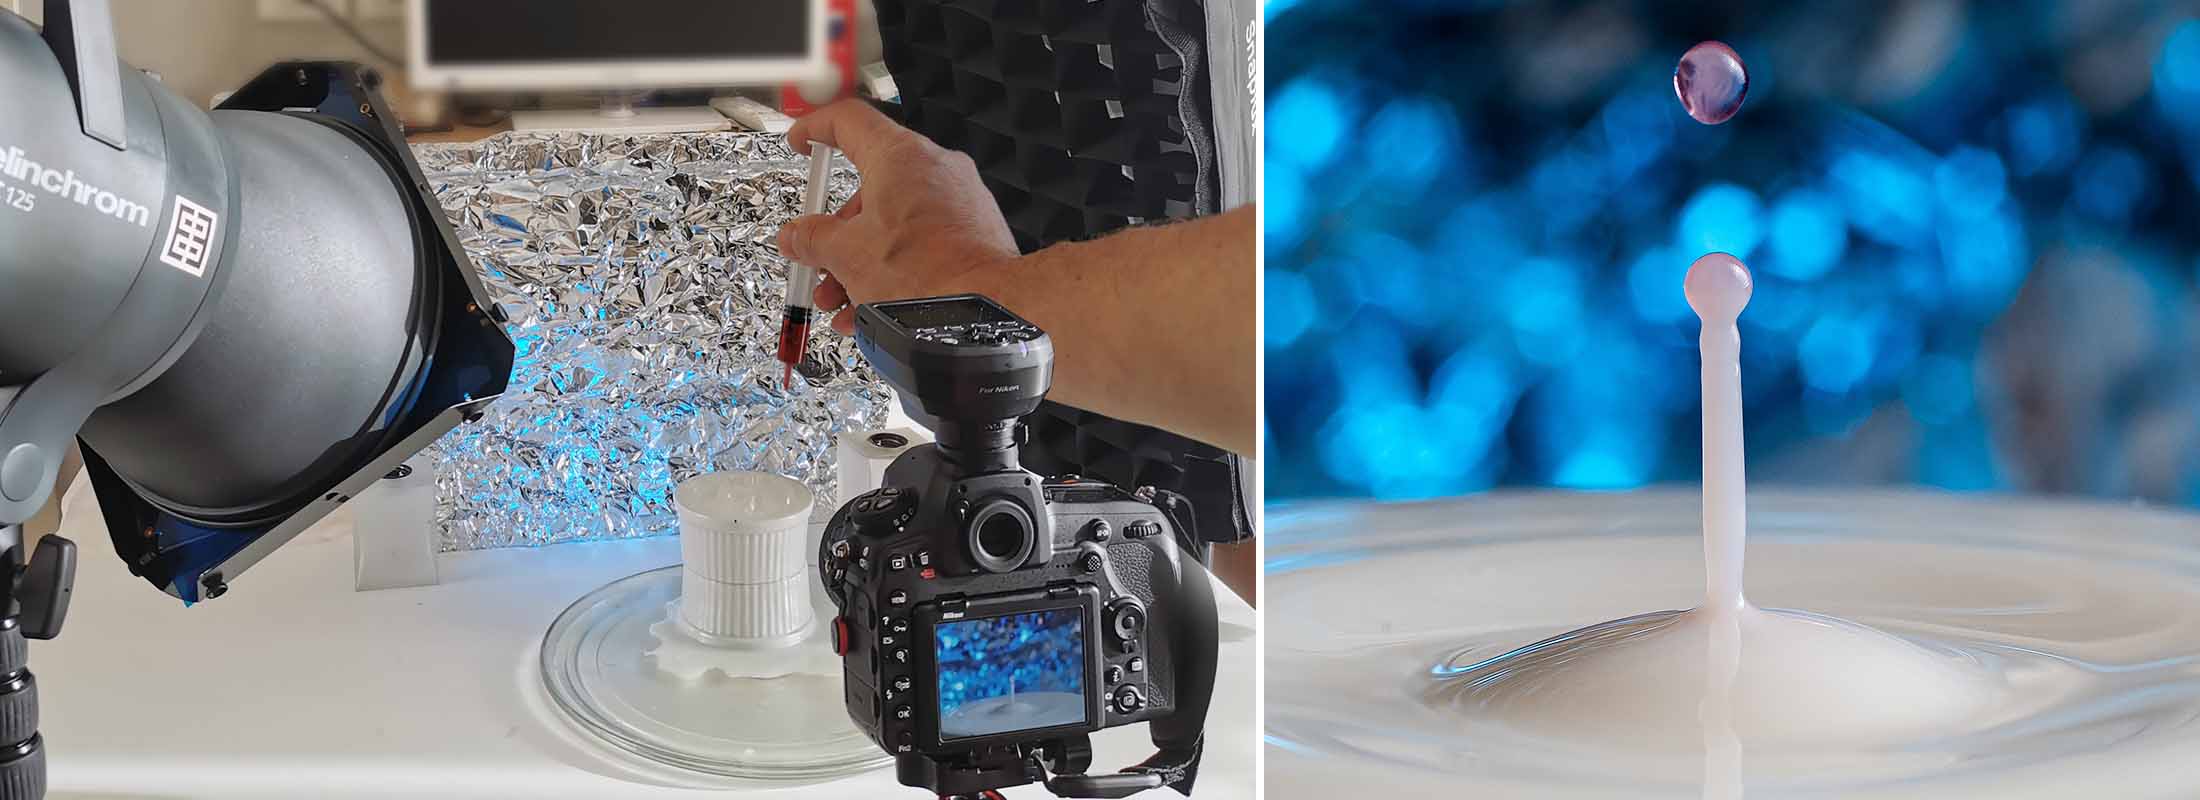 Drop photography with Elinchrom ELC usin HSS 